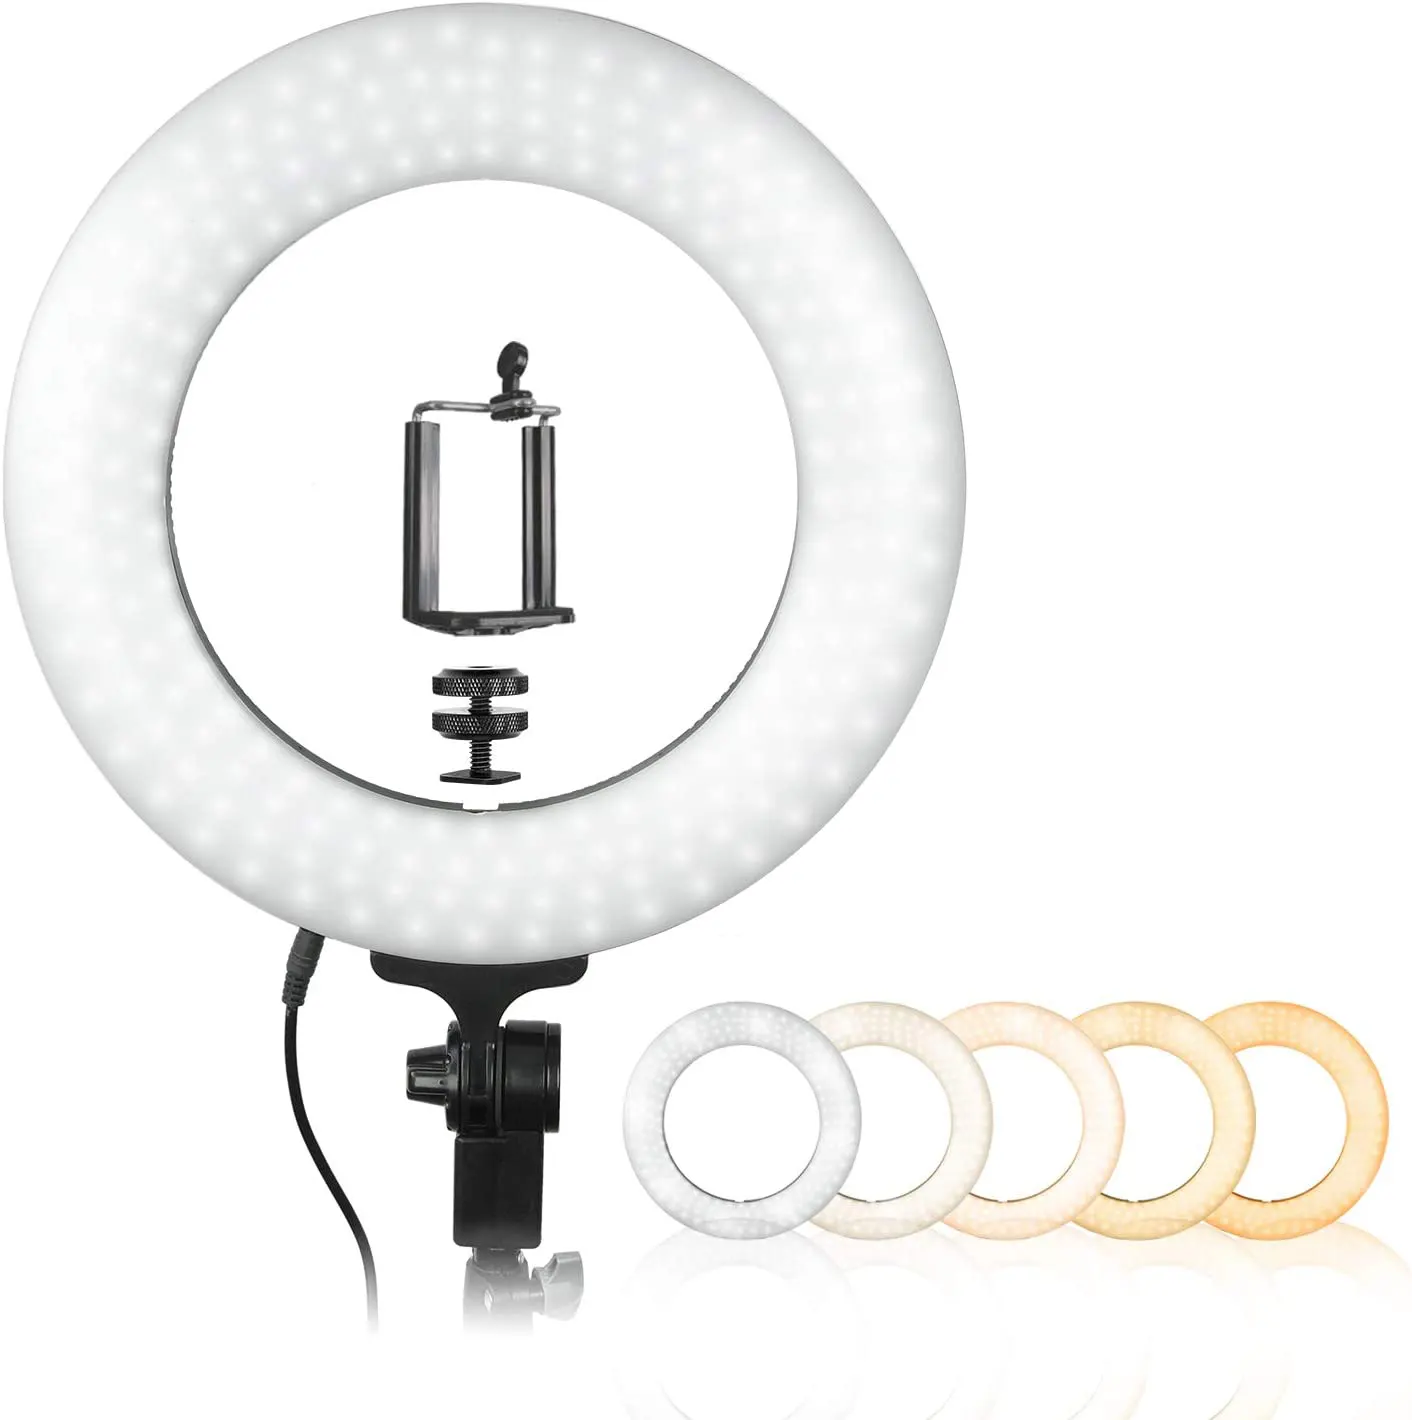 LimoStudio 14-inch LED Ring Light for product photography